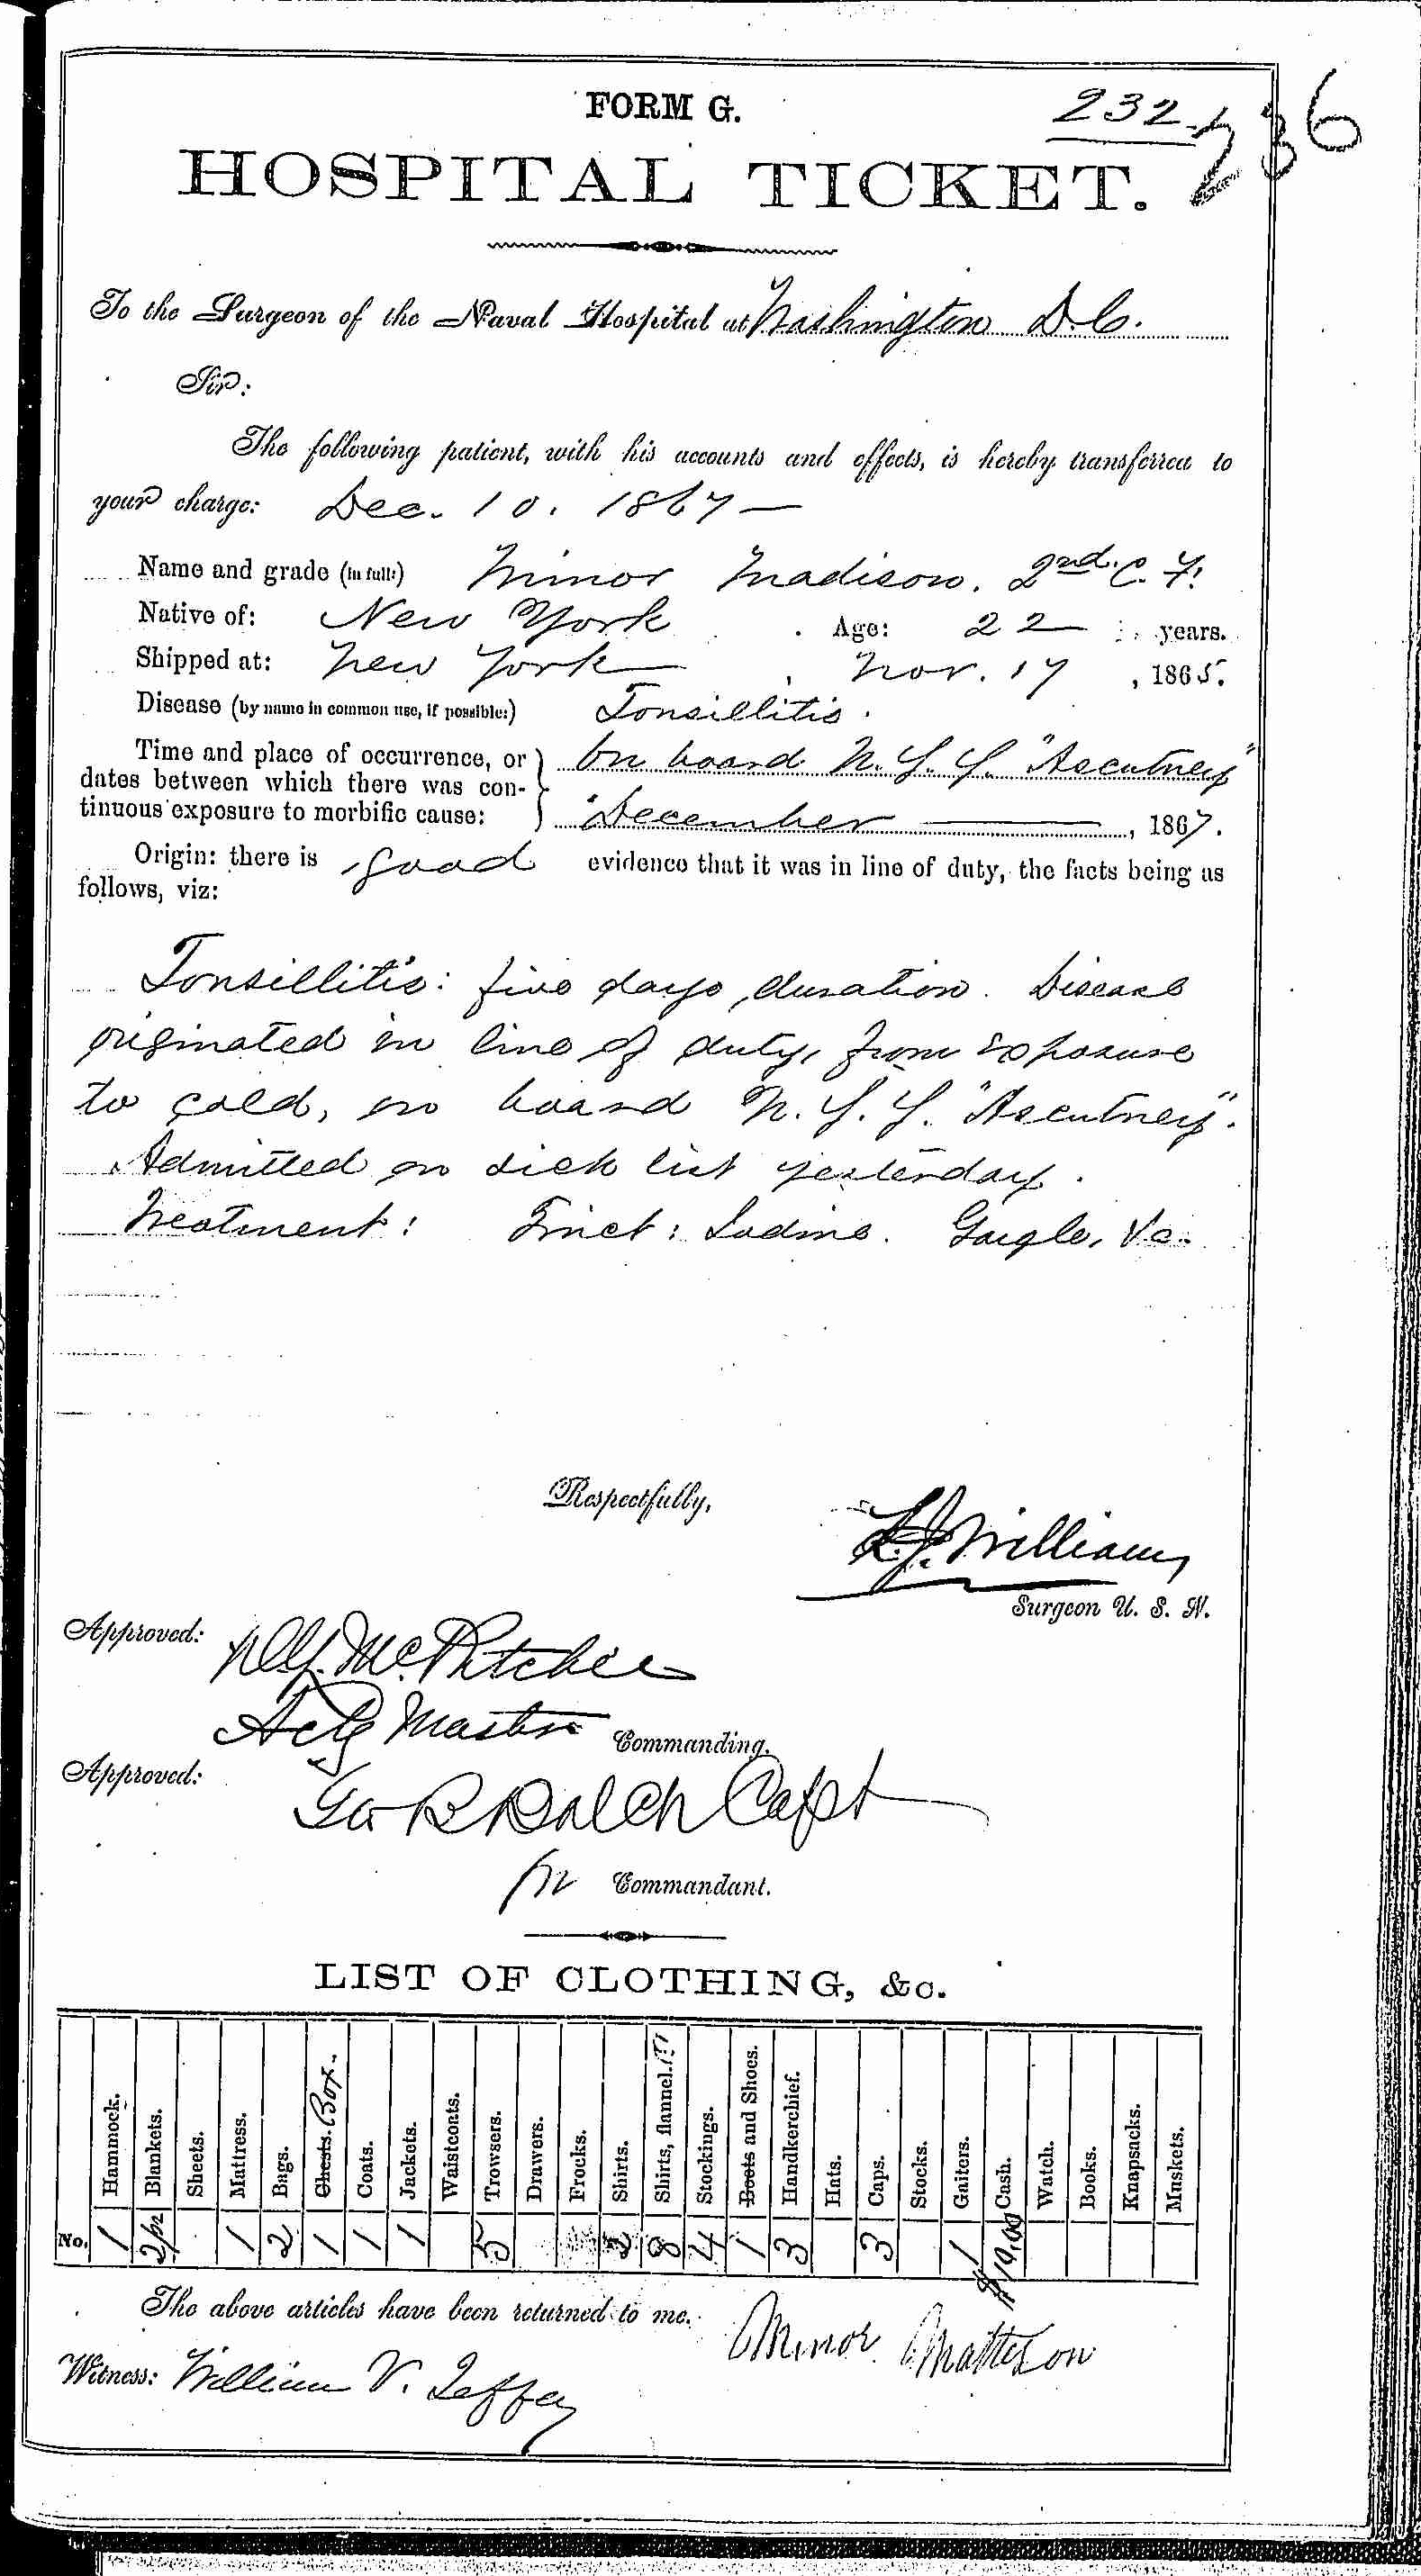 Entry for Minor Madison (page 1 of 2) in the log Hospital Tickets and Case Papers - Naval Hospital - Washington, D.C. - 1866-68